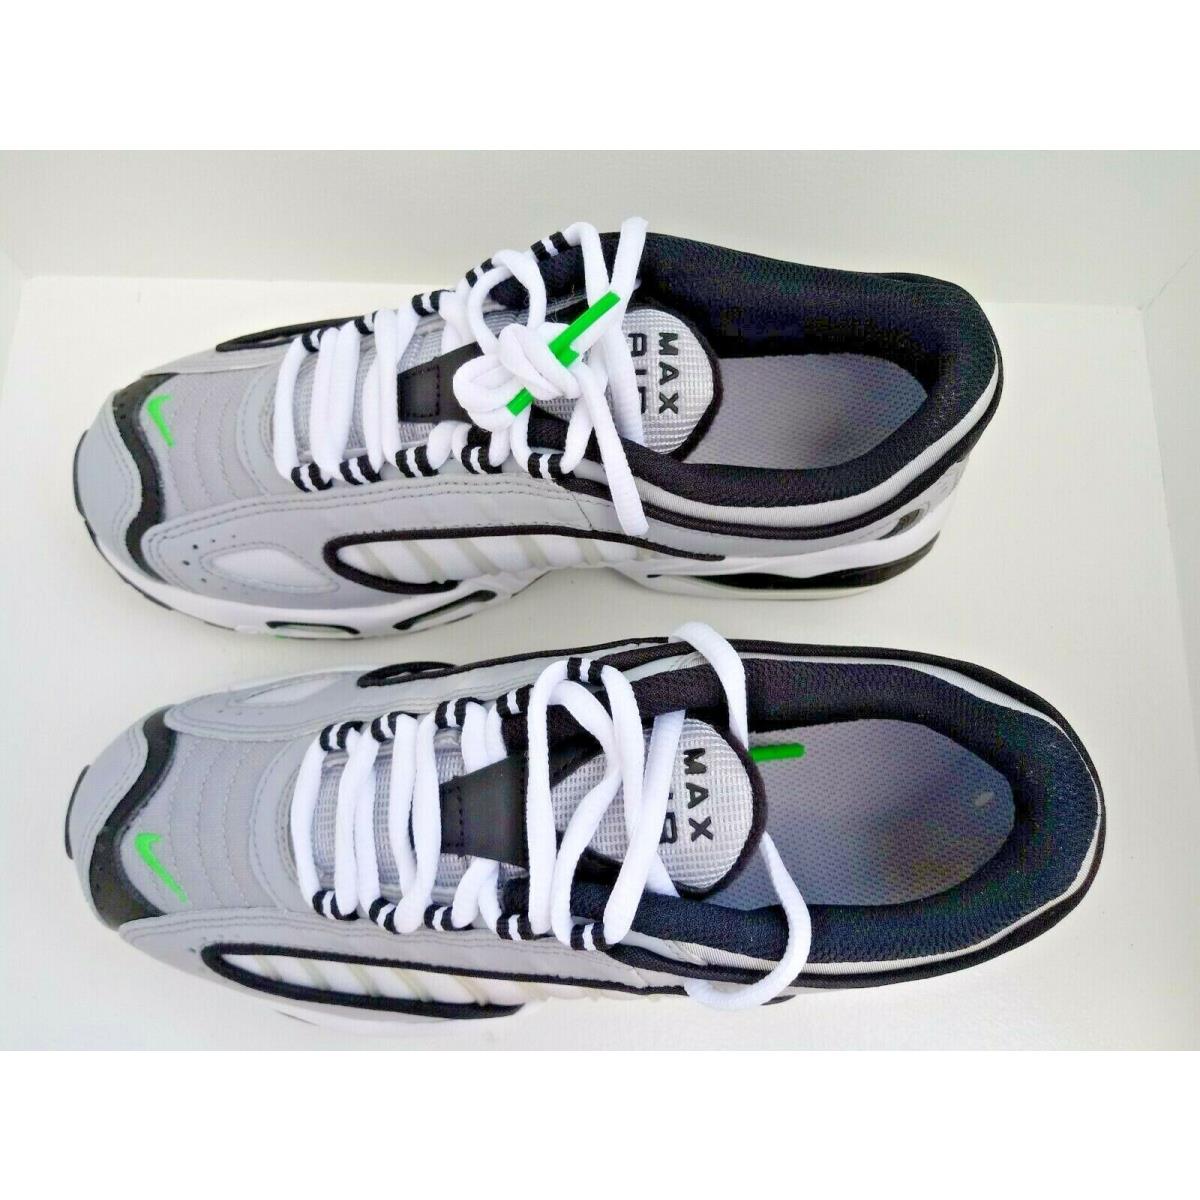 Nike shoes  - Wolf Grey/Black-Green Spark-White 6